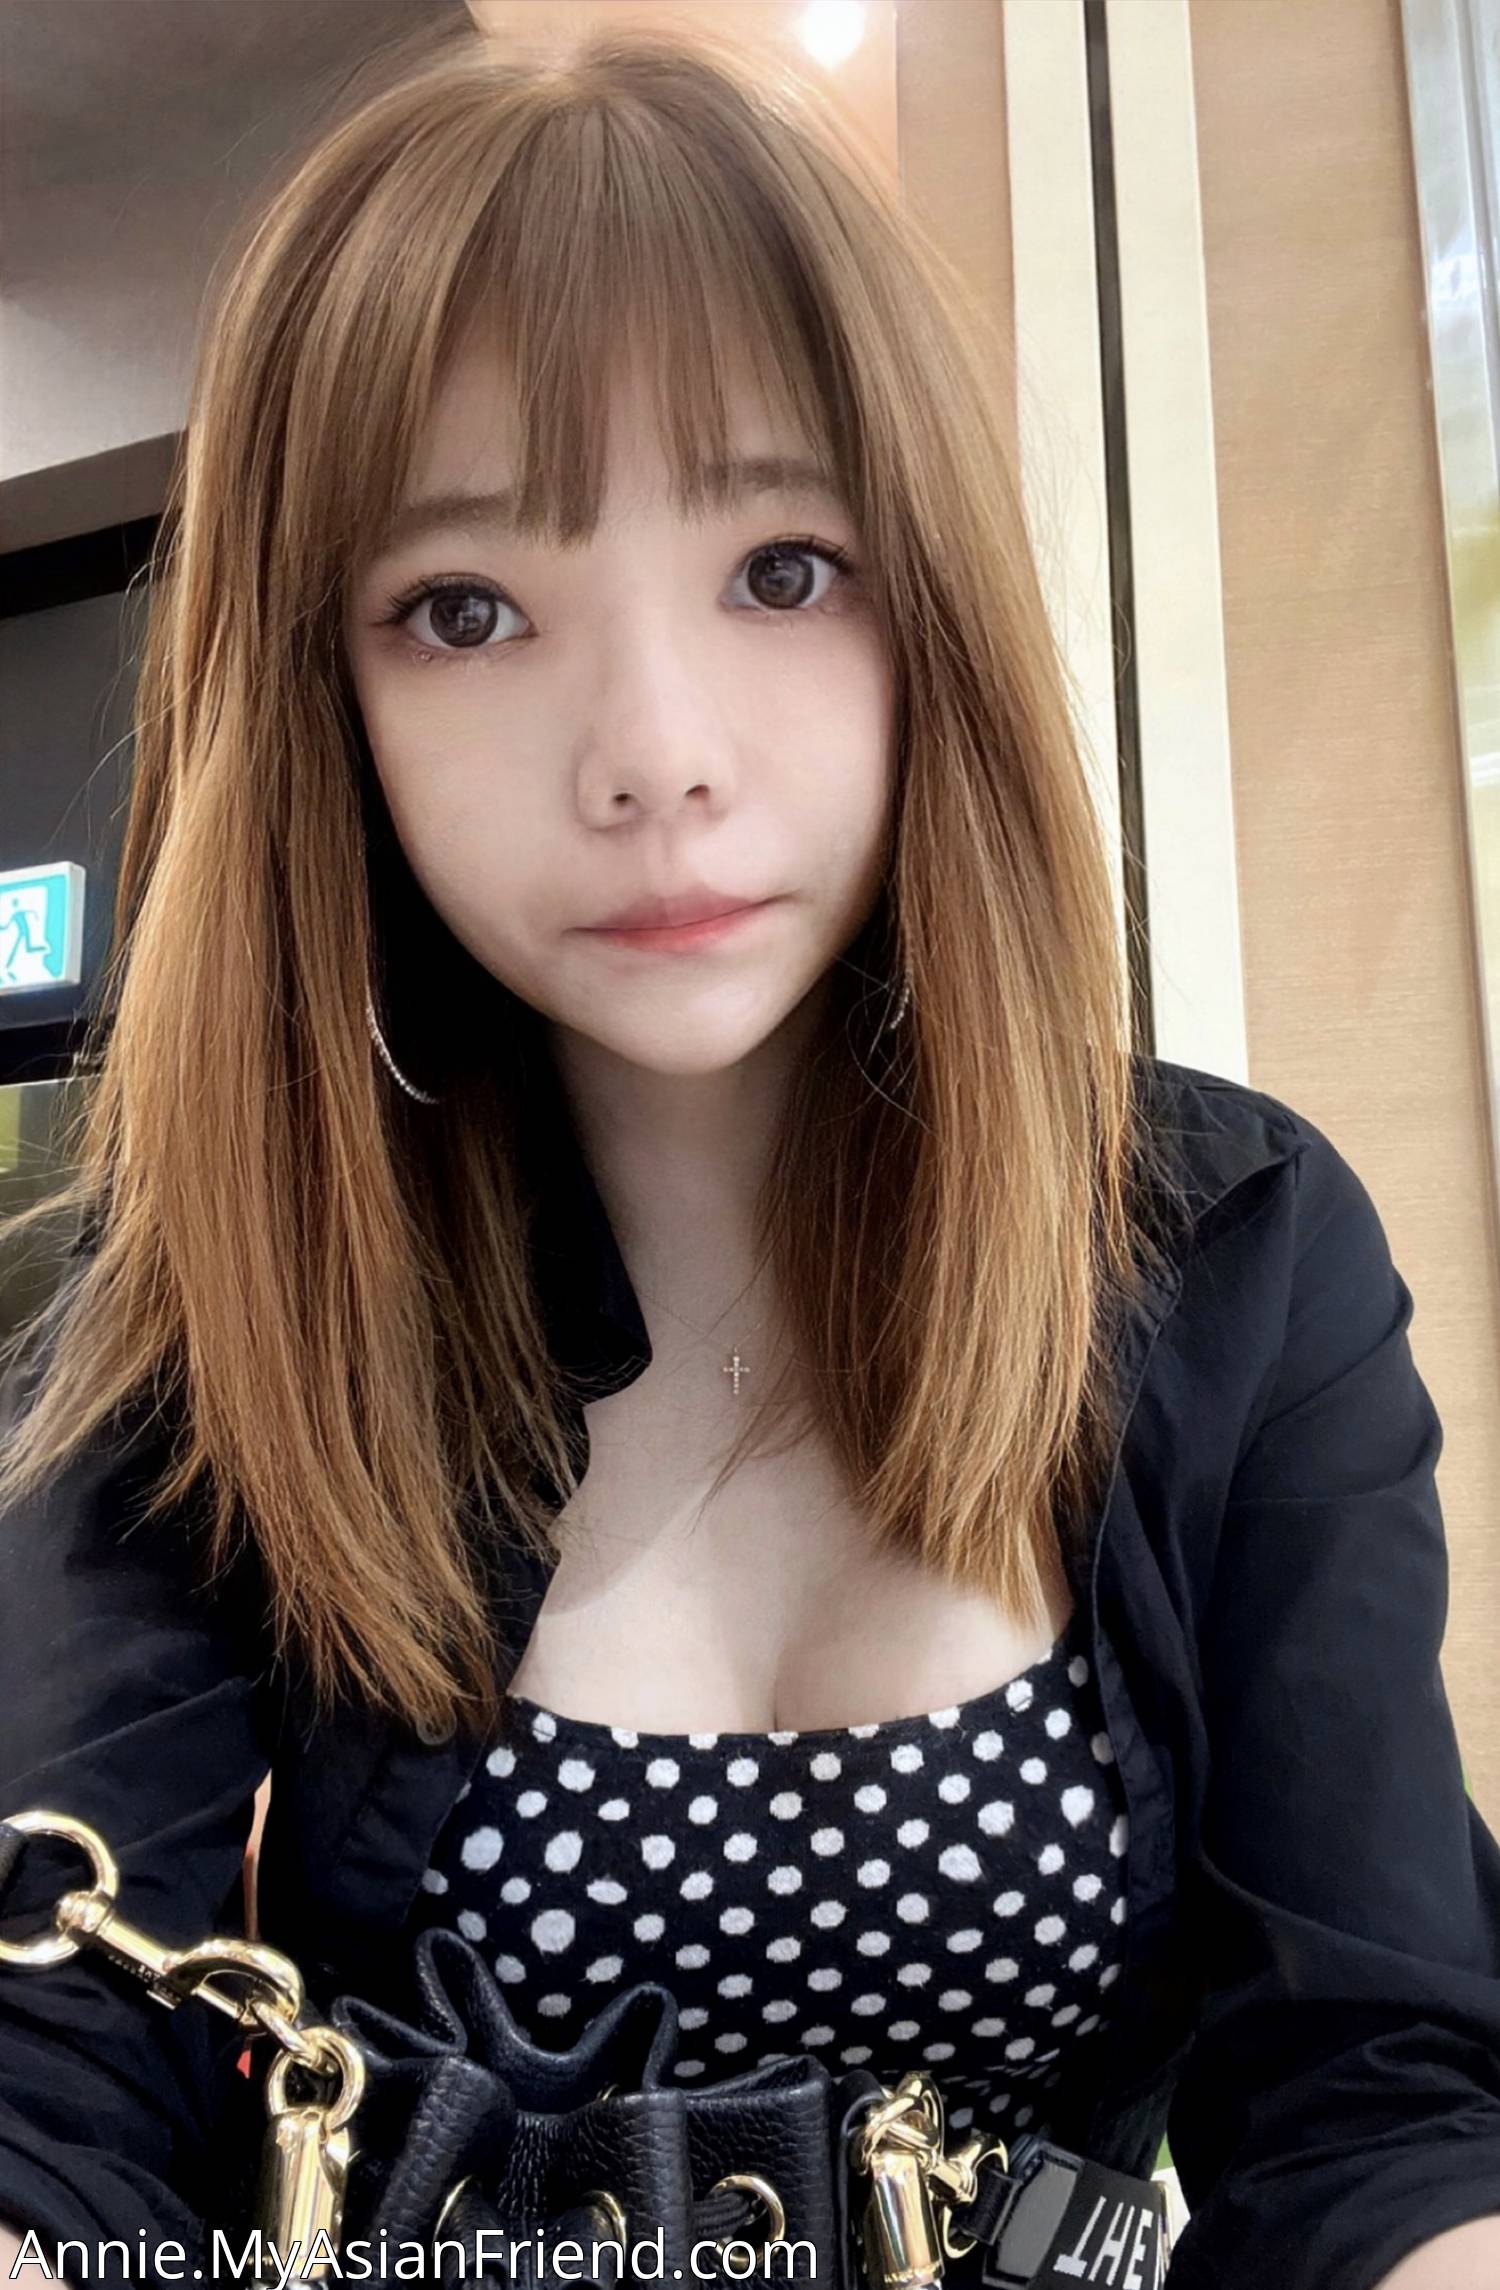 Annie's personal blog photo 1 added Thursday the 15th of September 2022